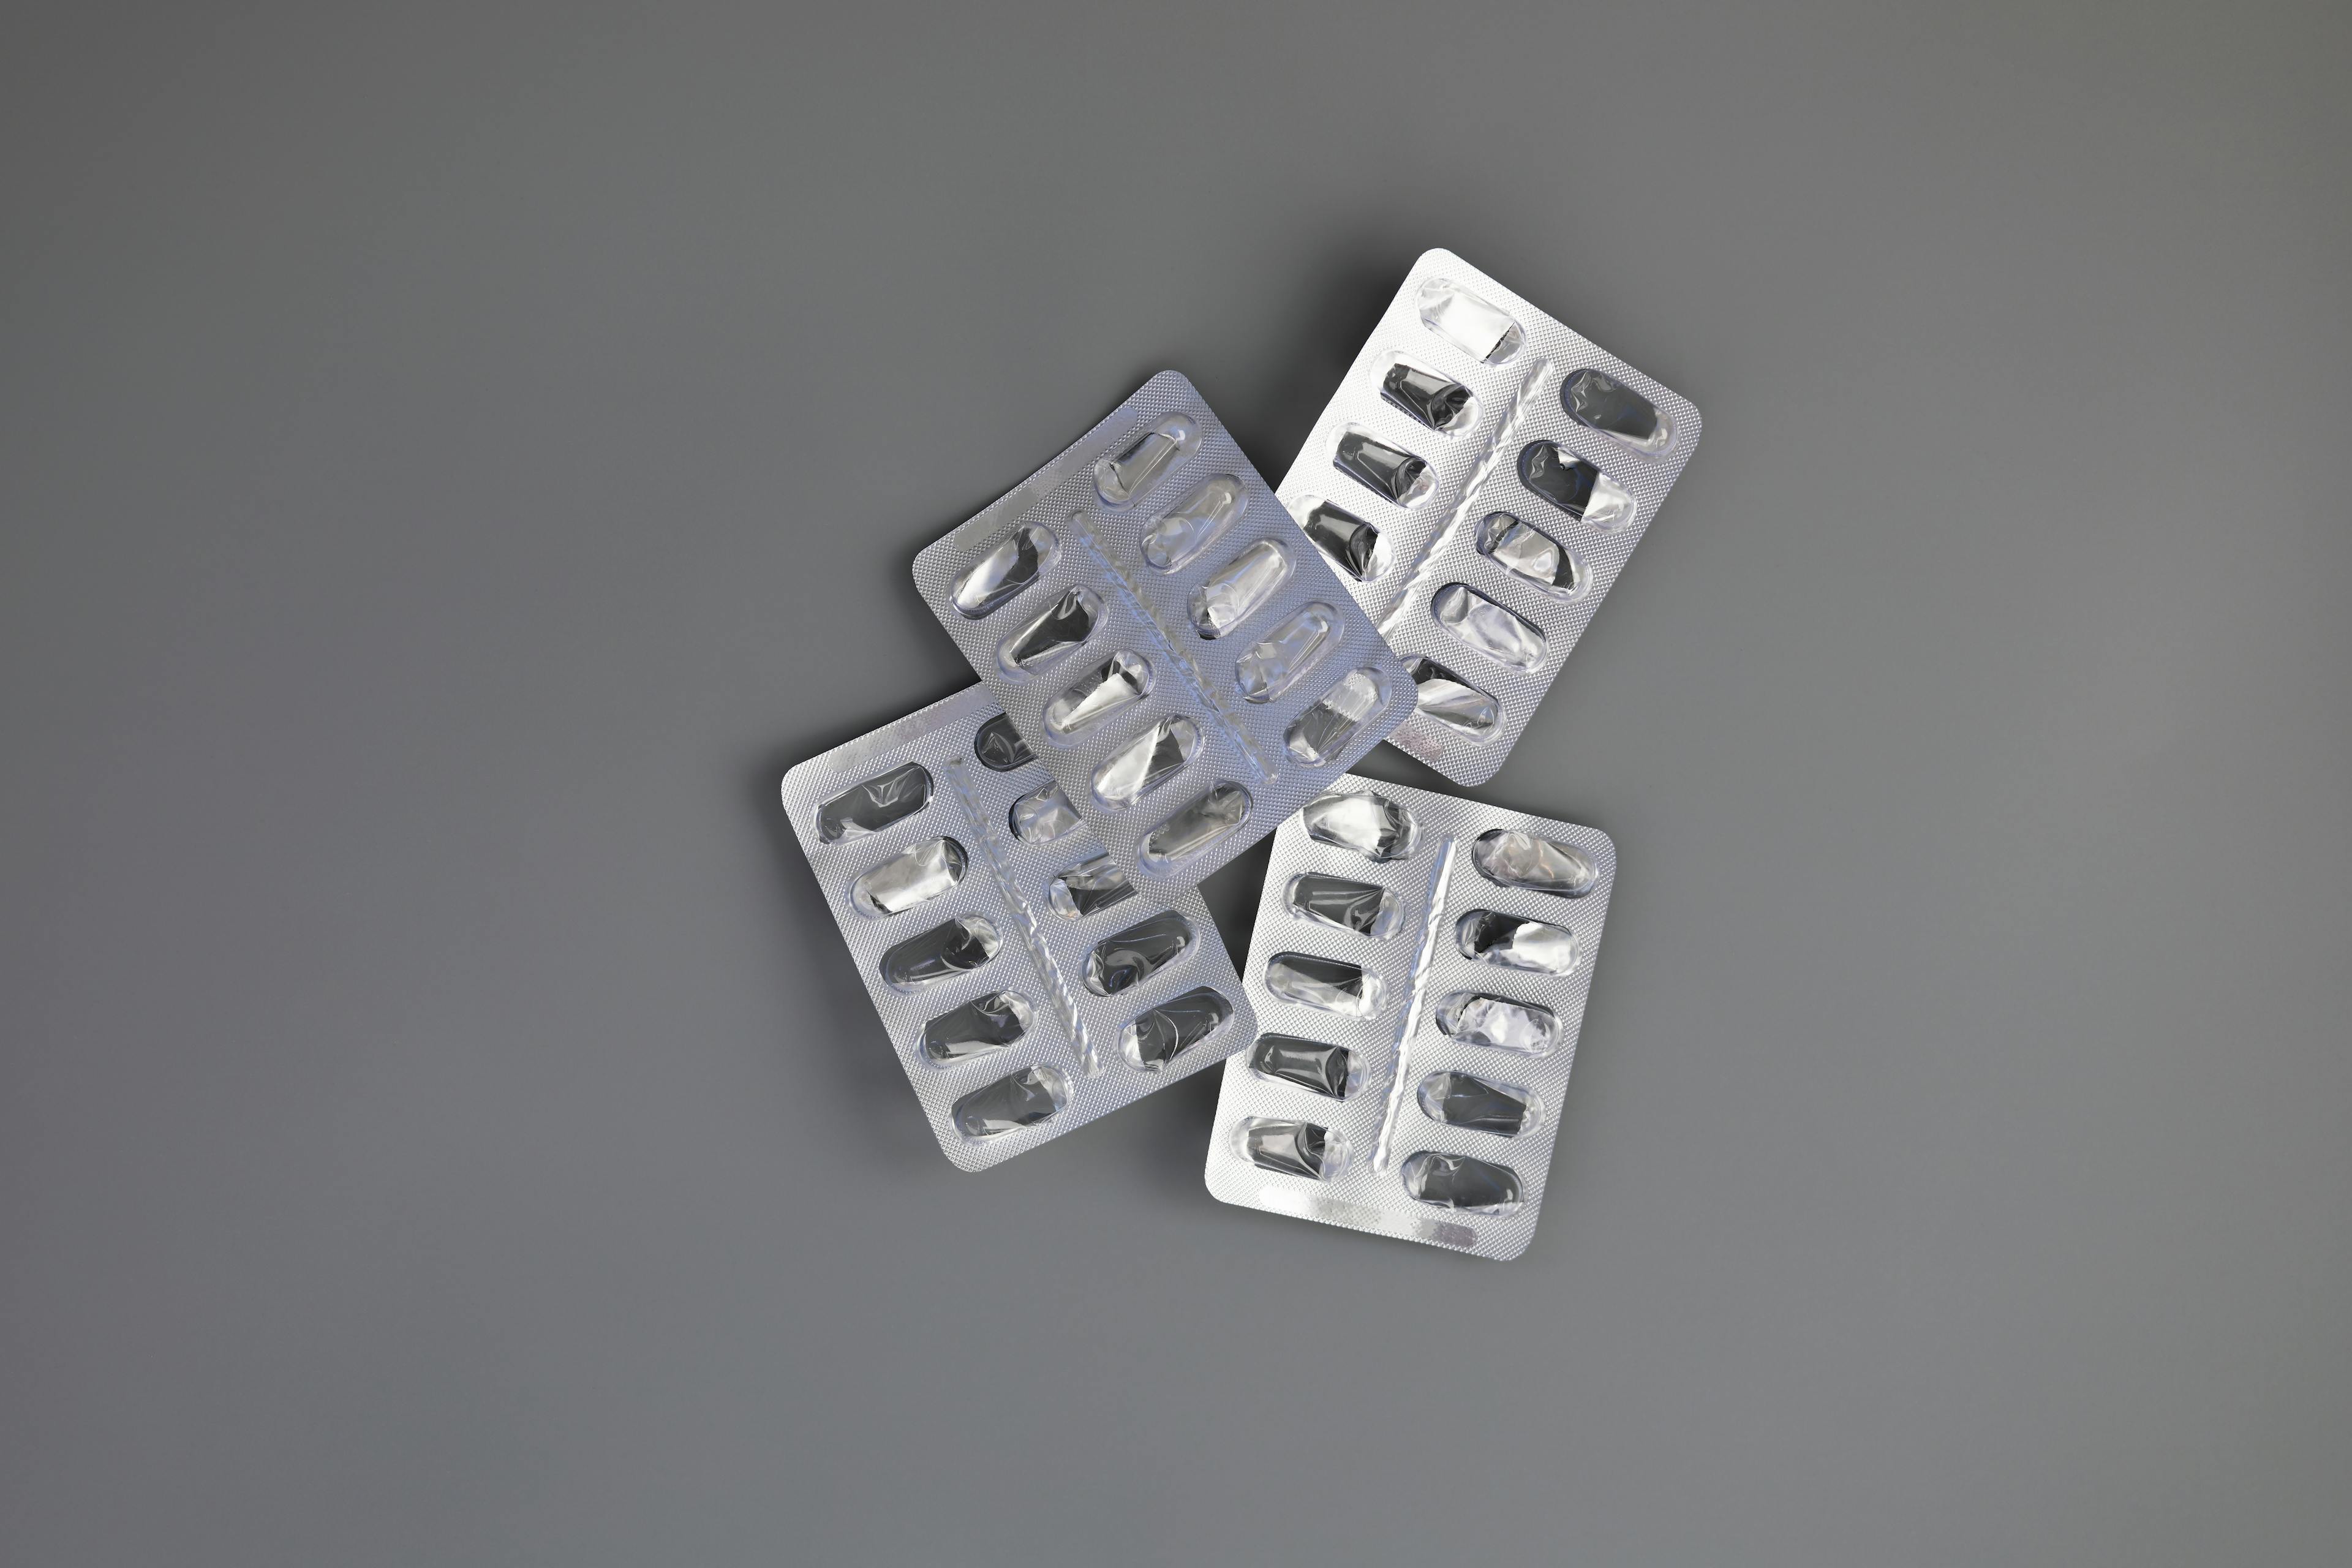 4 packets of medications laid flat on a grey surface